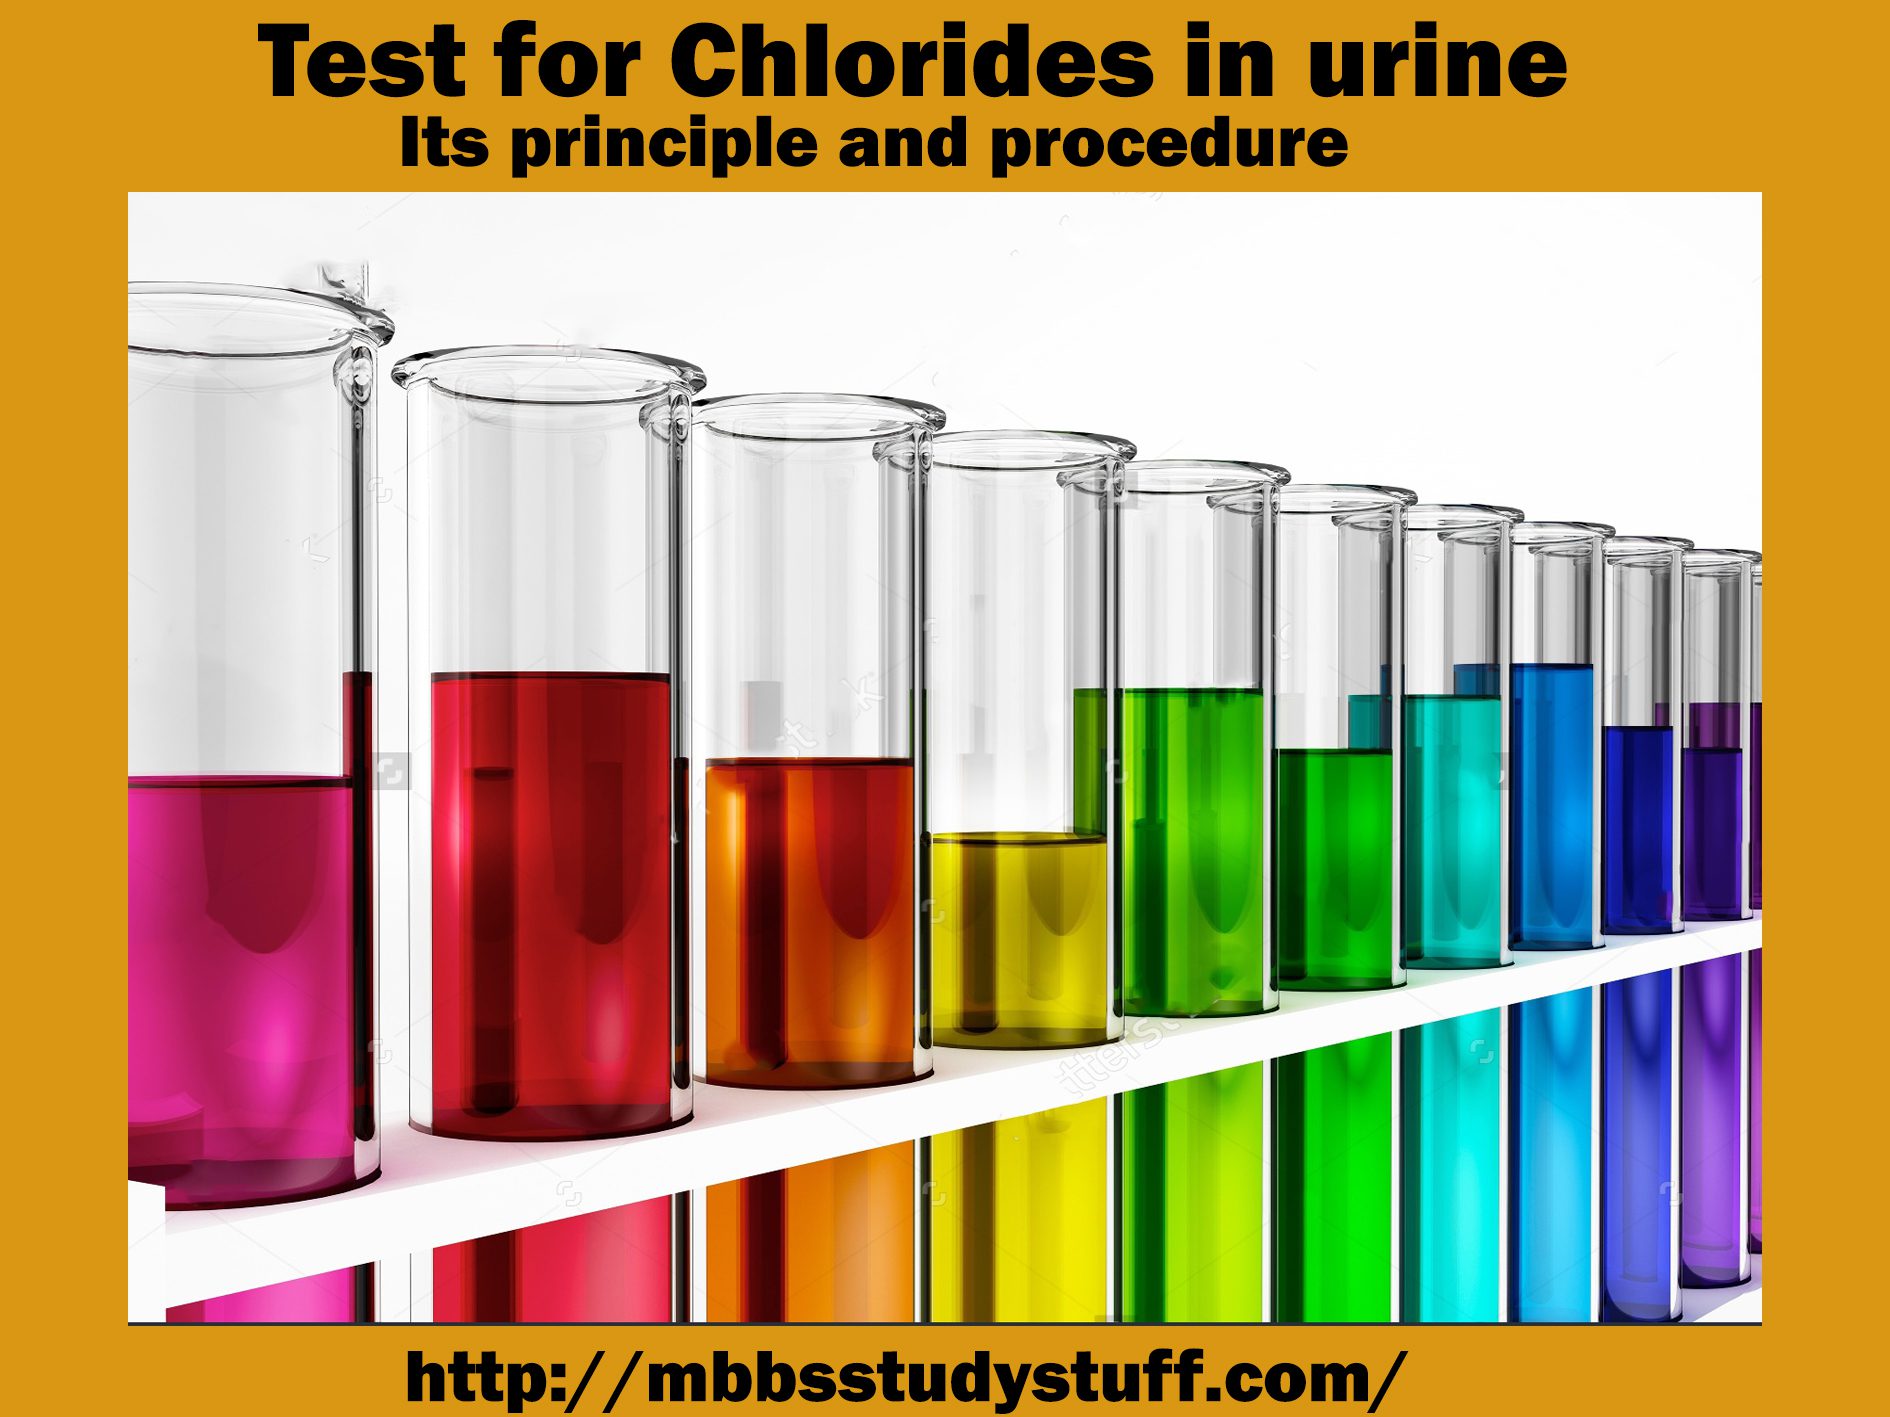 Test for Chlorides in urine